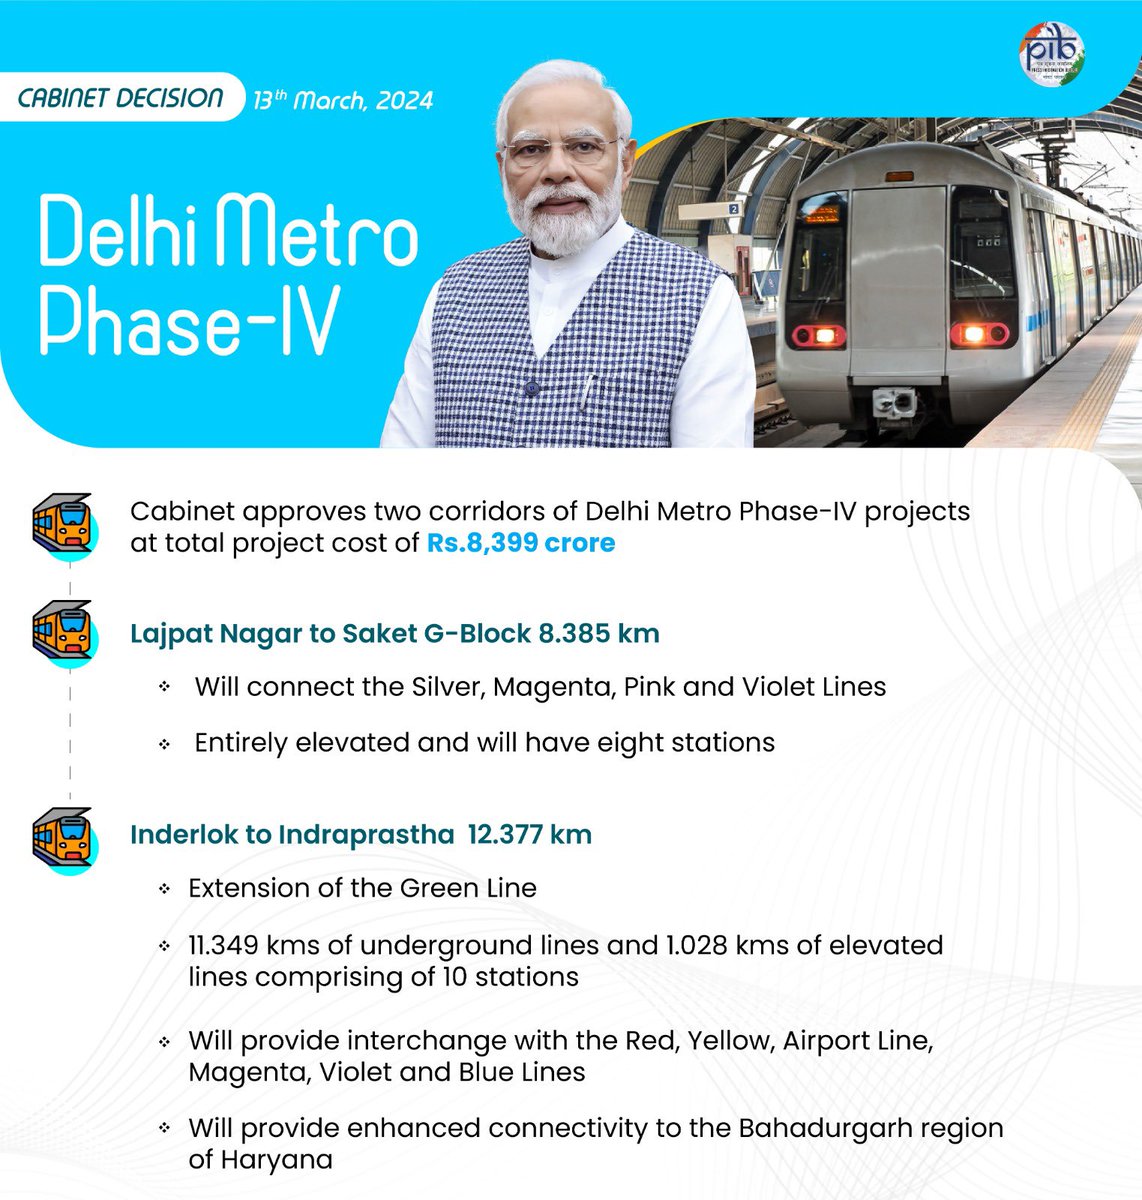 #Cabinet approves two corridors viz Lajpat Nagar to Saket G-Block and Inderlok to Indraprastha, of Delhi Metro Phase-IV projects at total project cost of Rs.8,399 crore

#CabinetDecisions